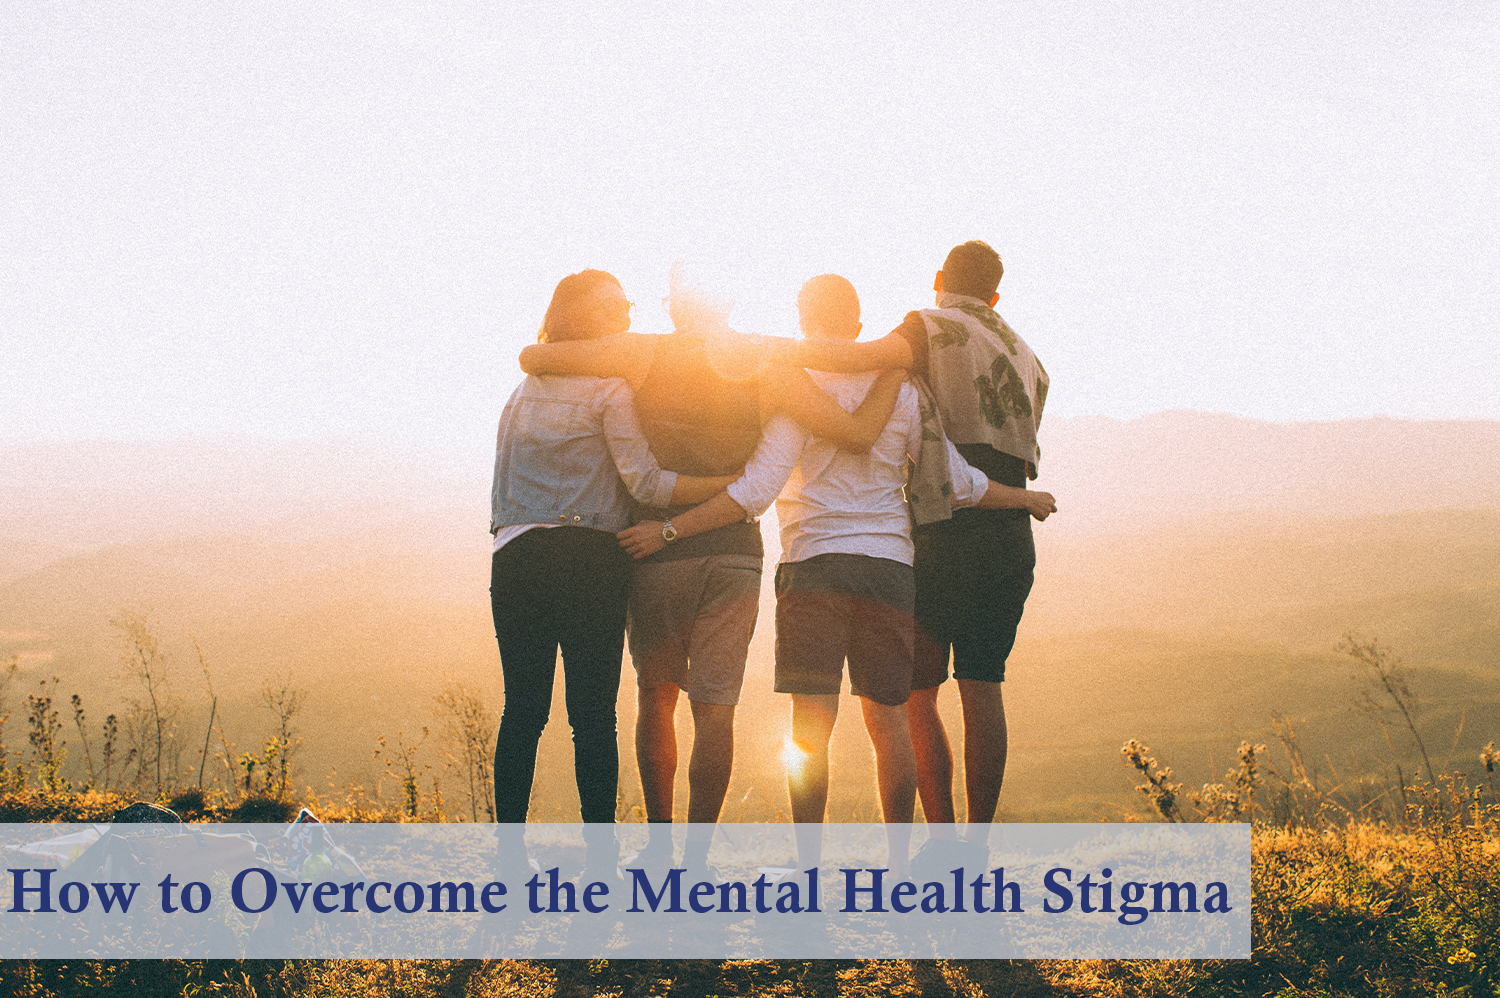 Friends at looking at a sunset, supporting each other to defeat the mental health stigma.